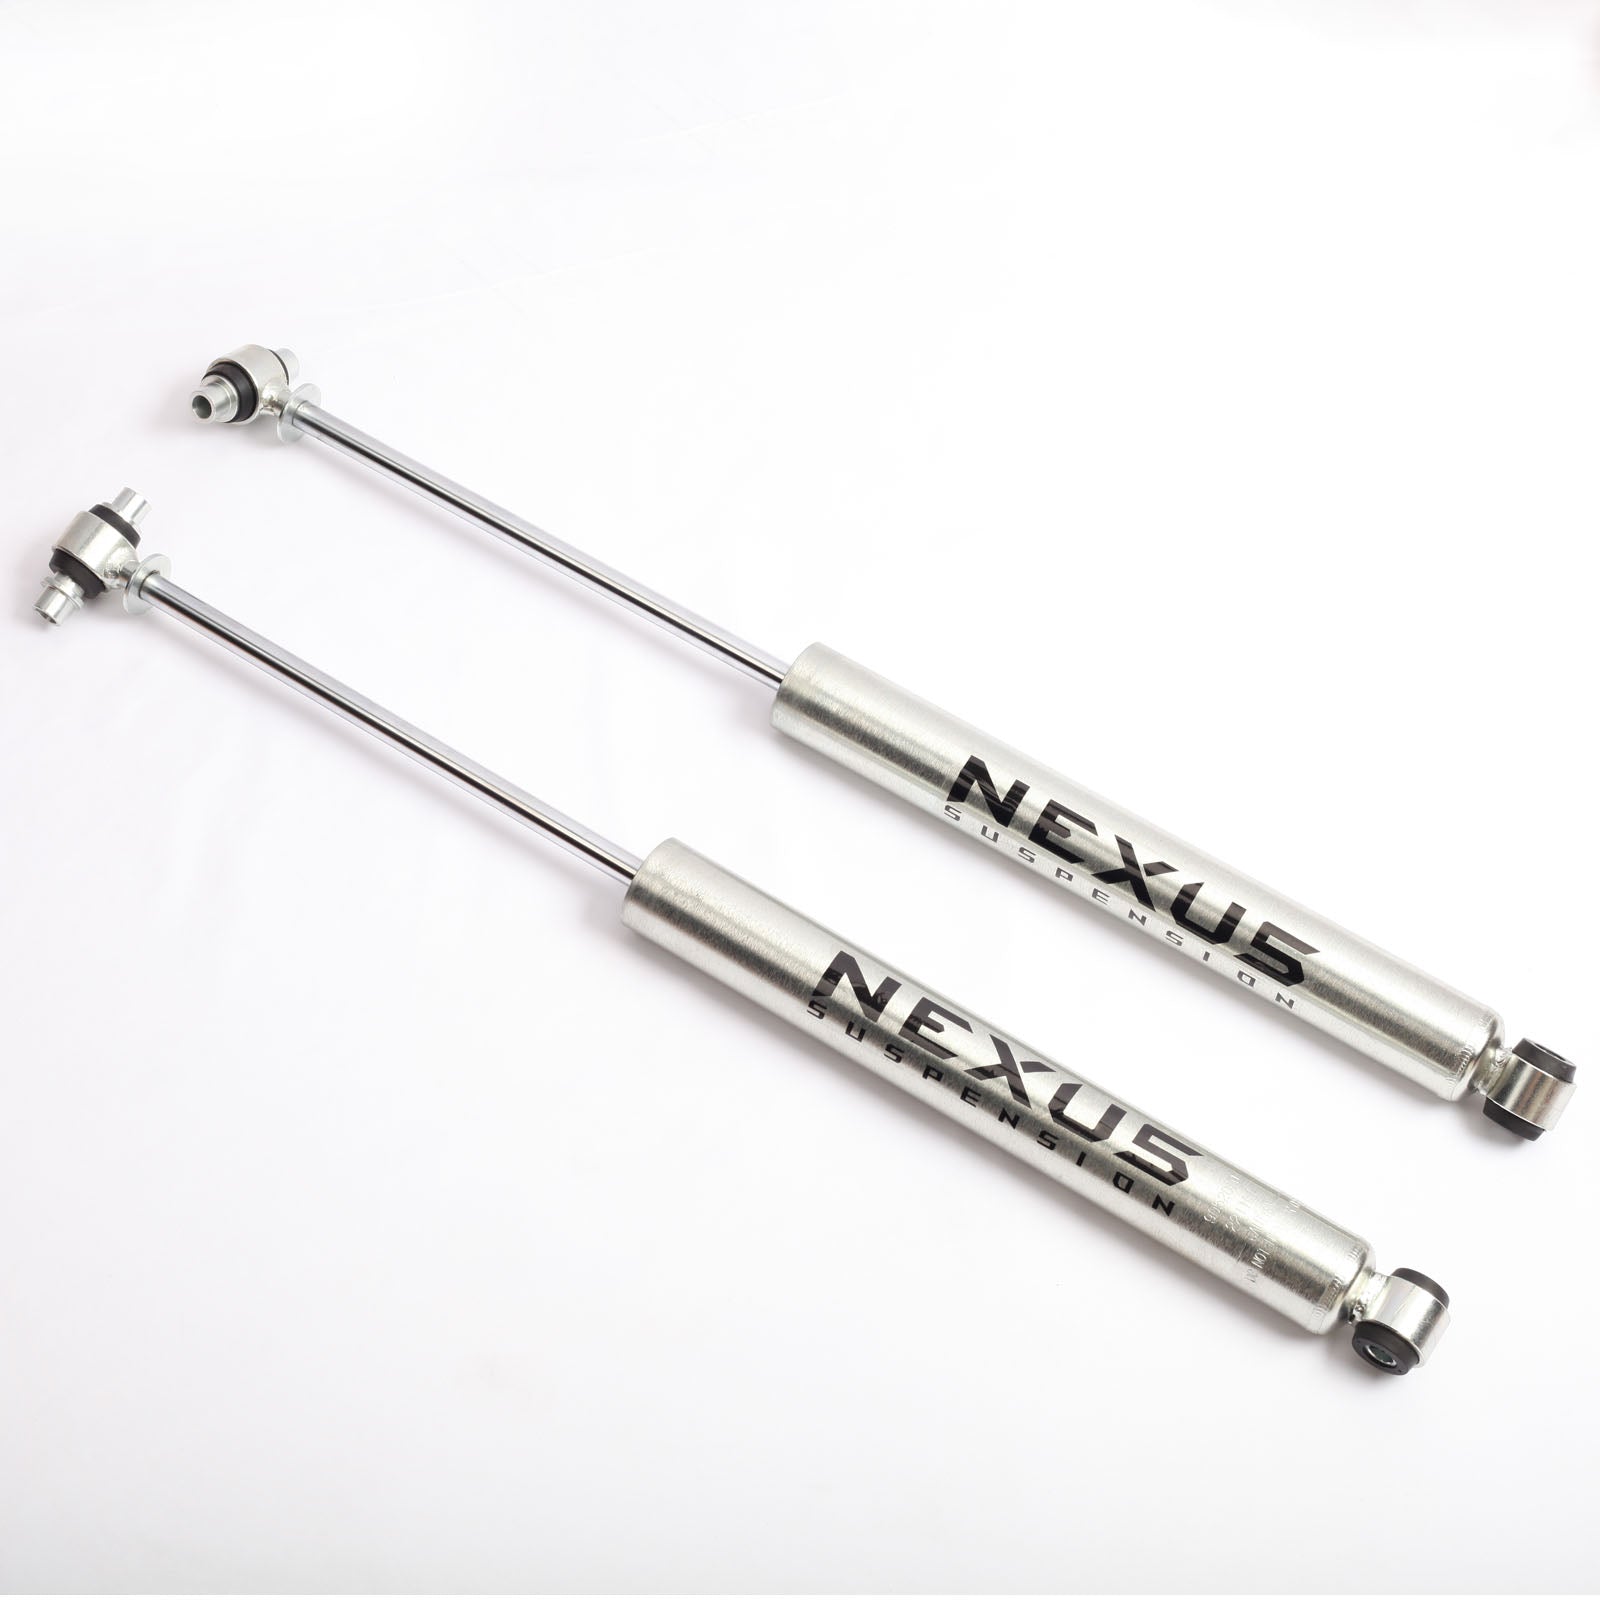 NEXUS SUSPENSION 3-4 Inch Lift Rear Shock Absorber for 2007-2018 Chevy Silverado 1500 2wd/4wd GMC Sierra 1500 2wd/4wd,Zinc Plated Coating,Pair Pack